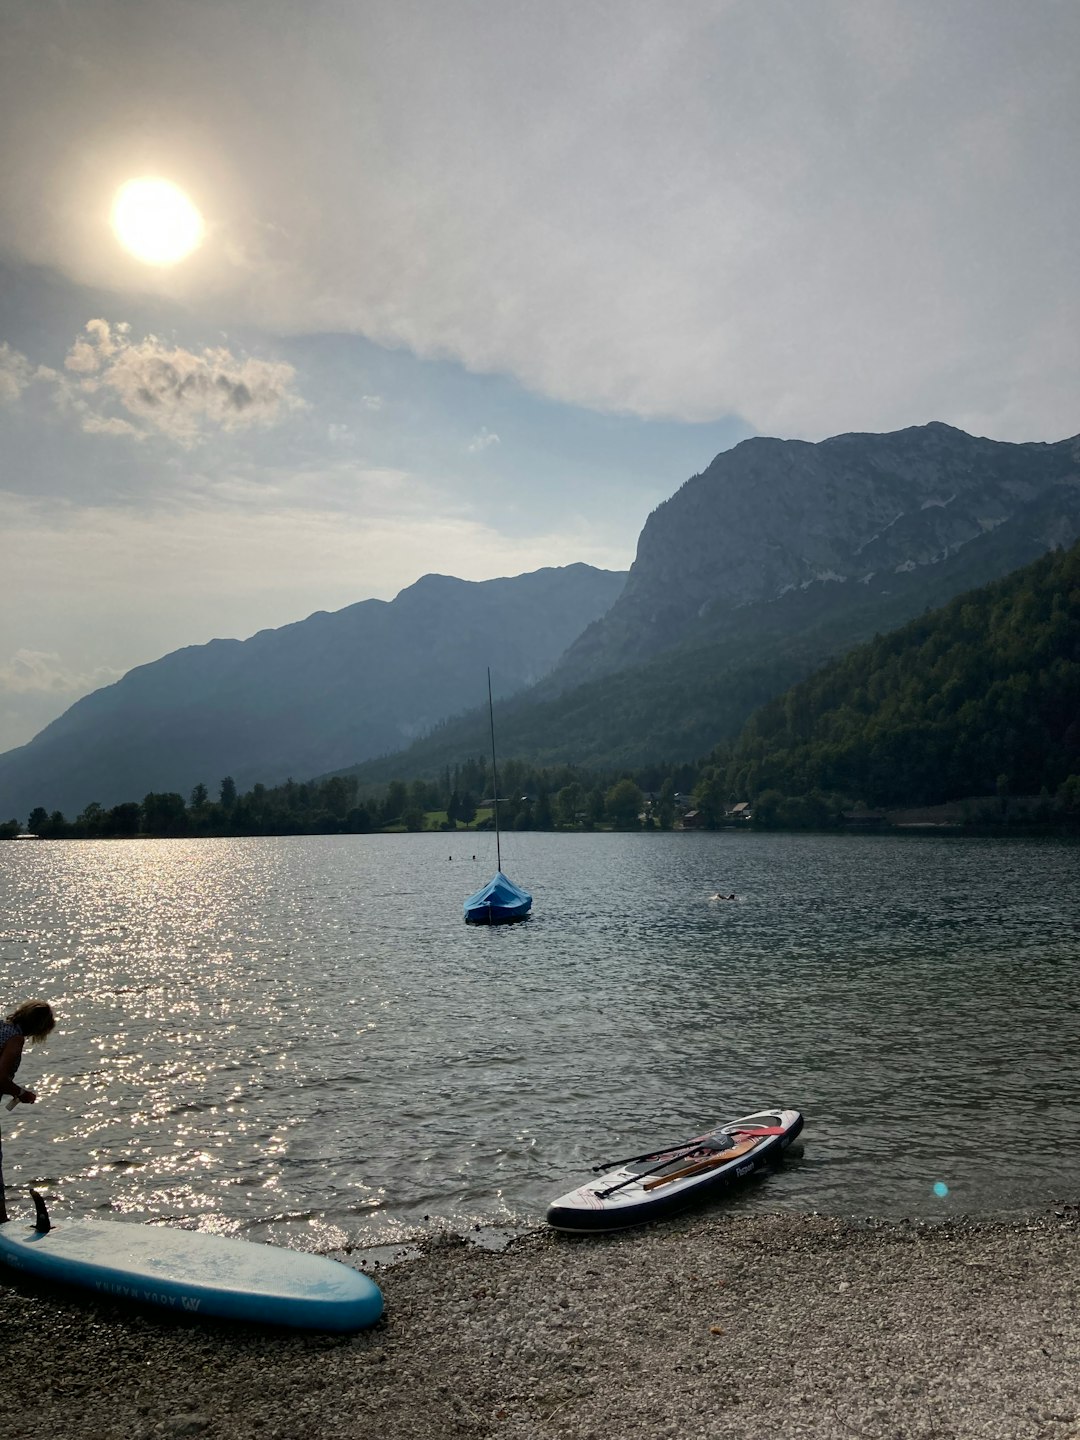 Travel Tips and Stories of Grundlsee in Austria